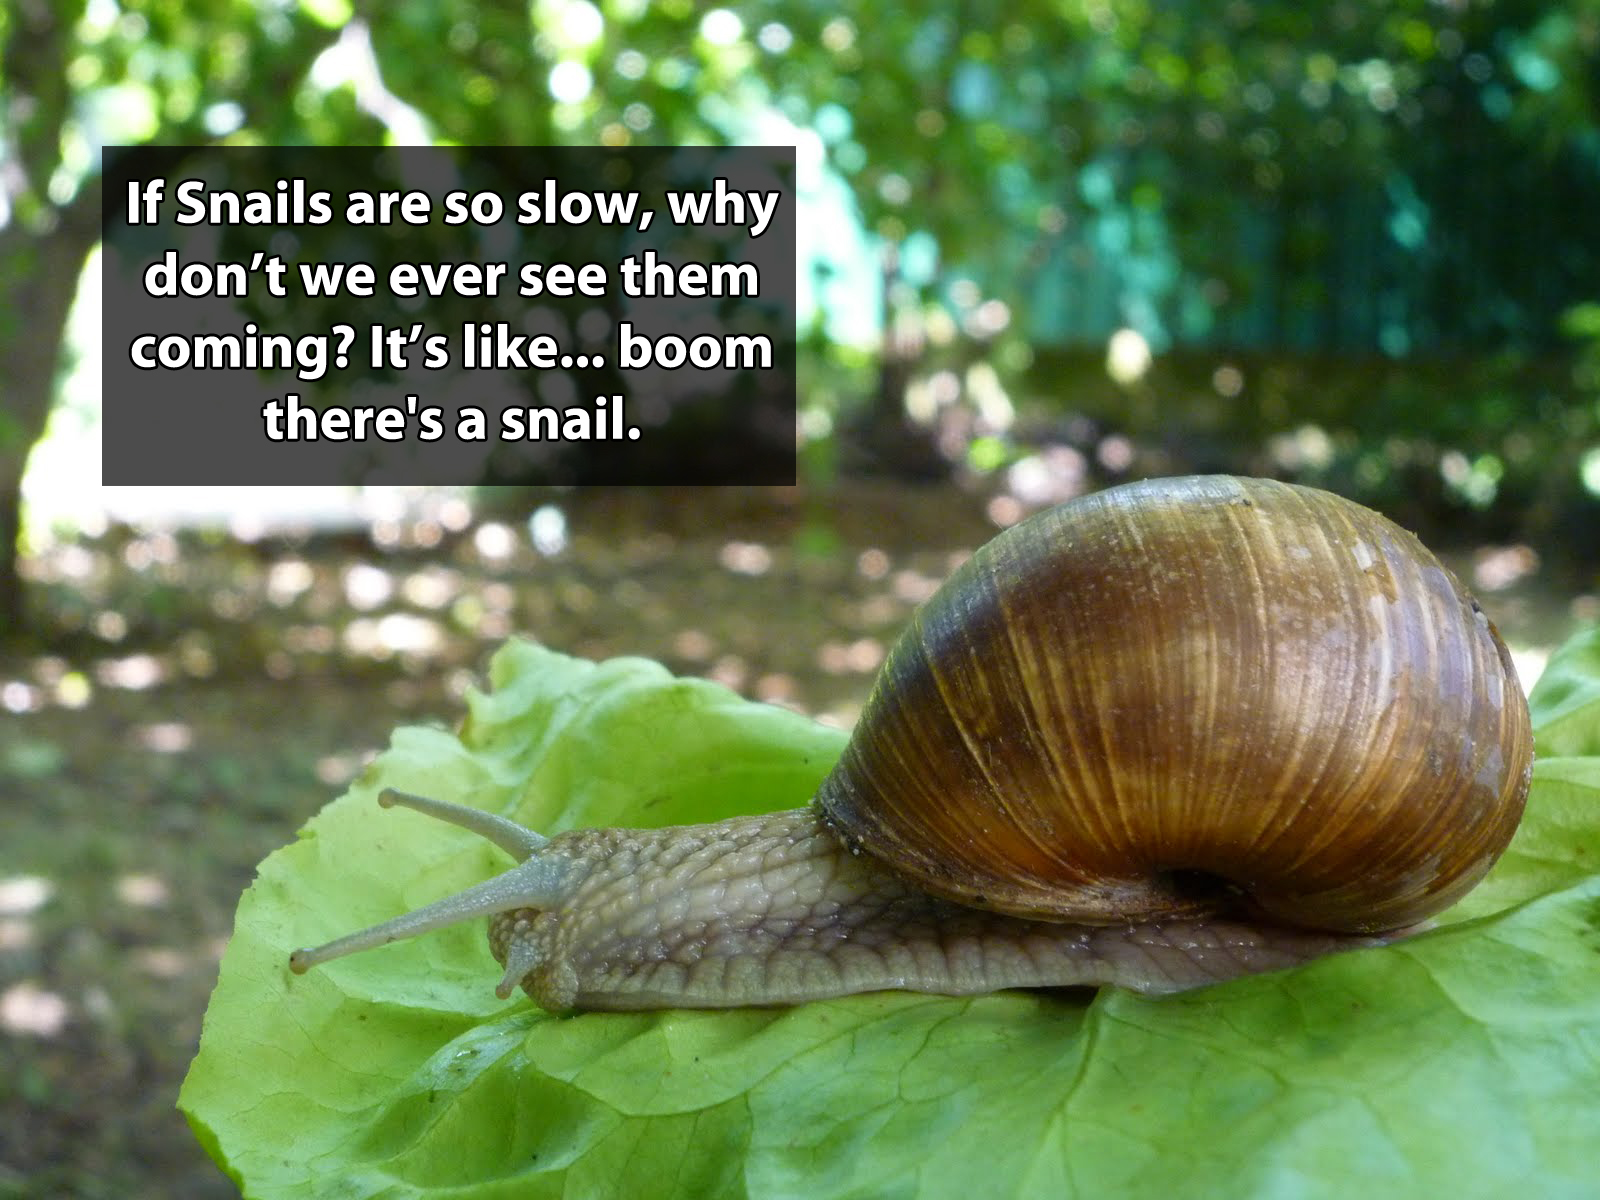 snail thoughts - If Snails are so slow, why don't we ever see them coming? It's ... boom there's a snail.